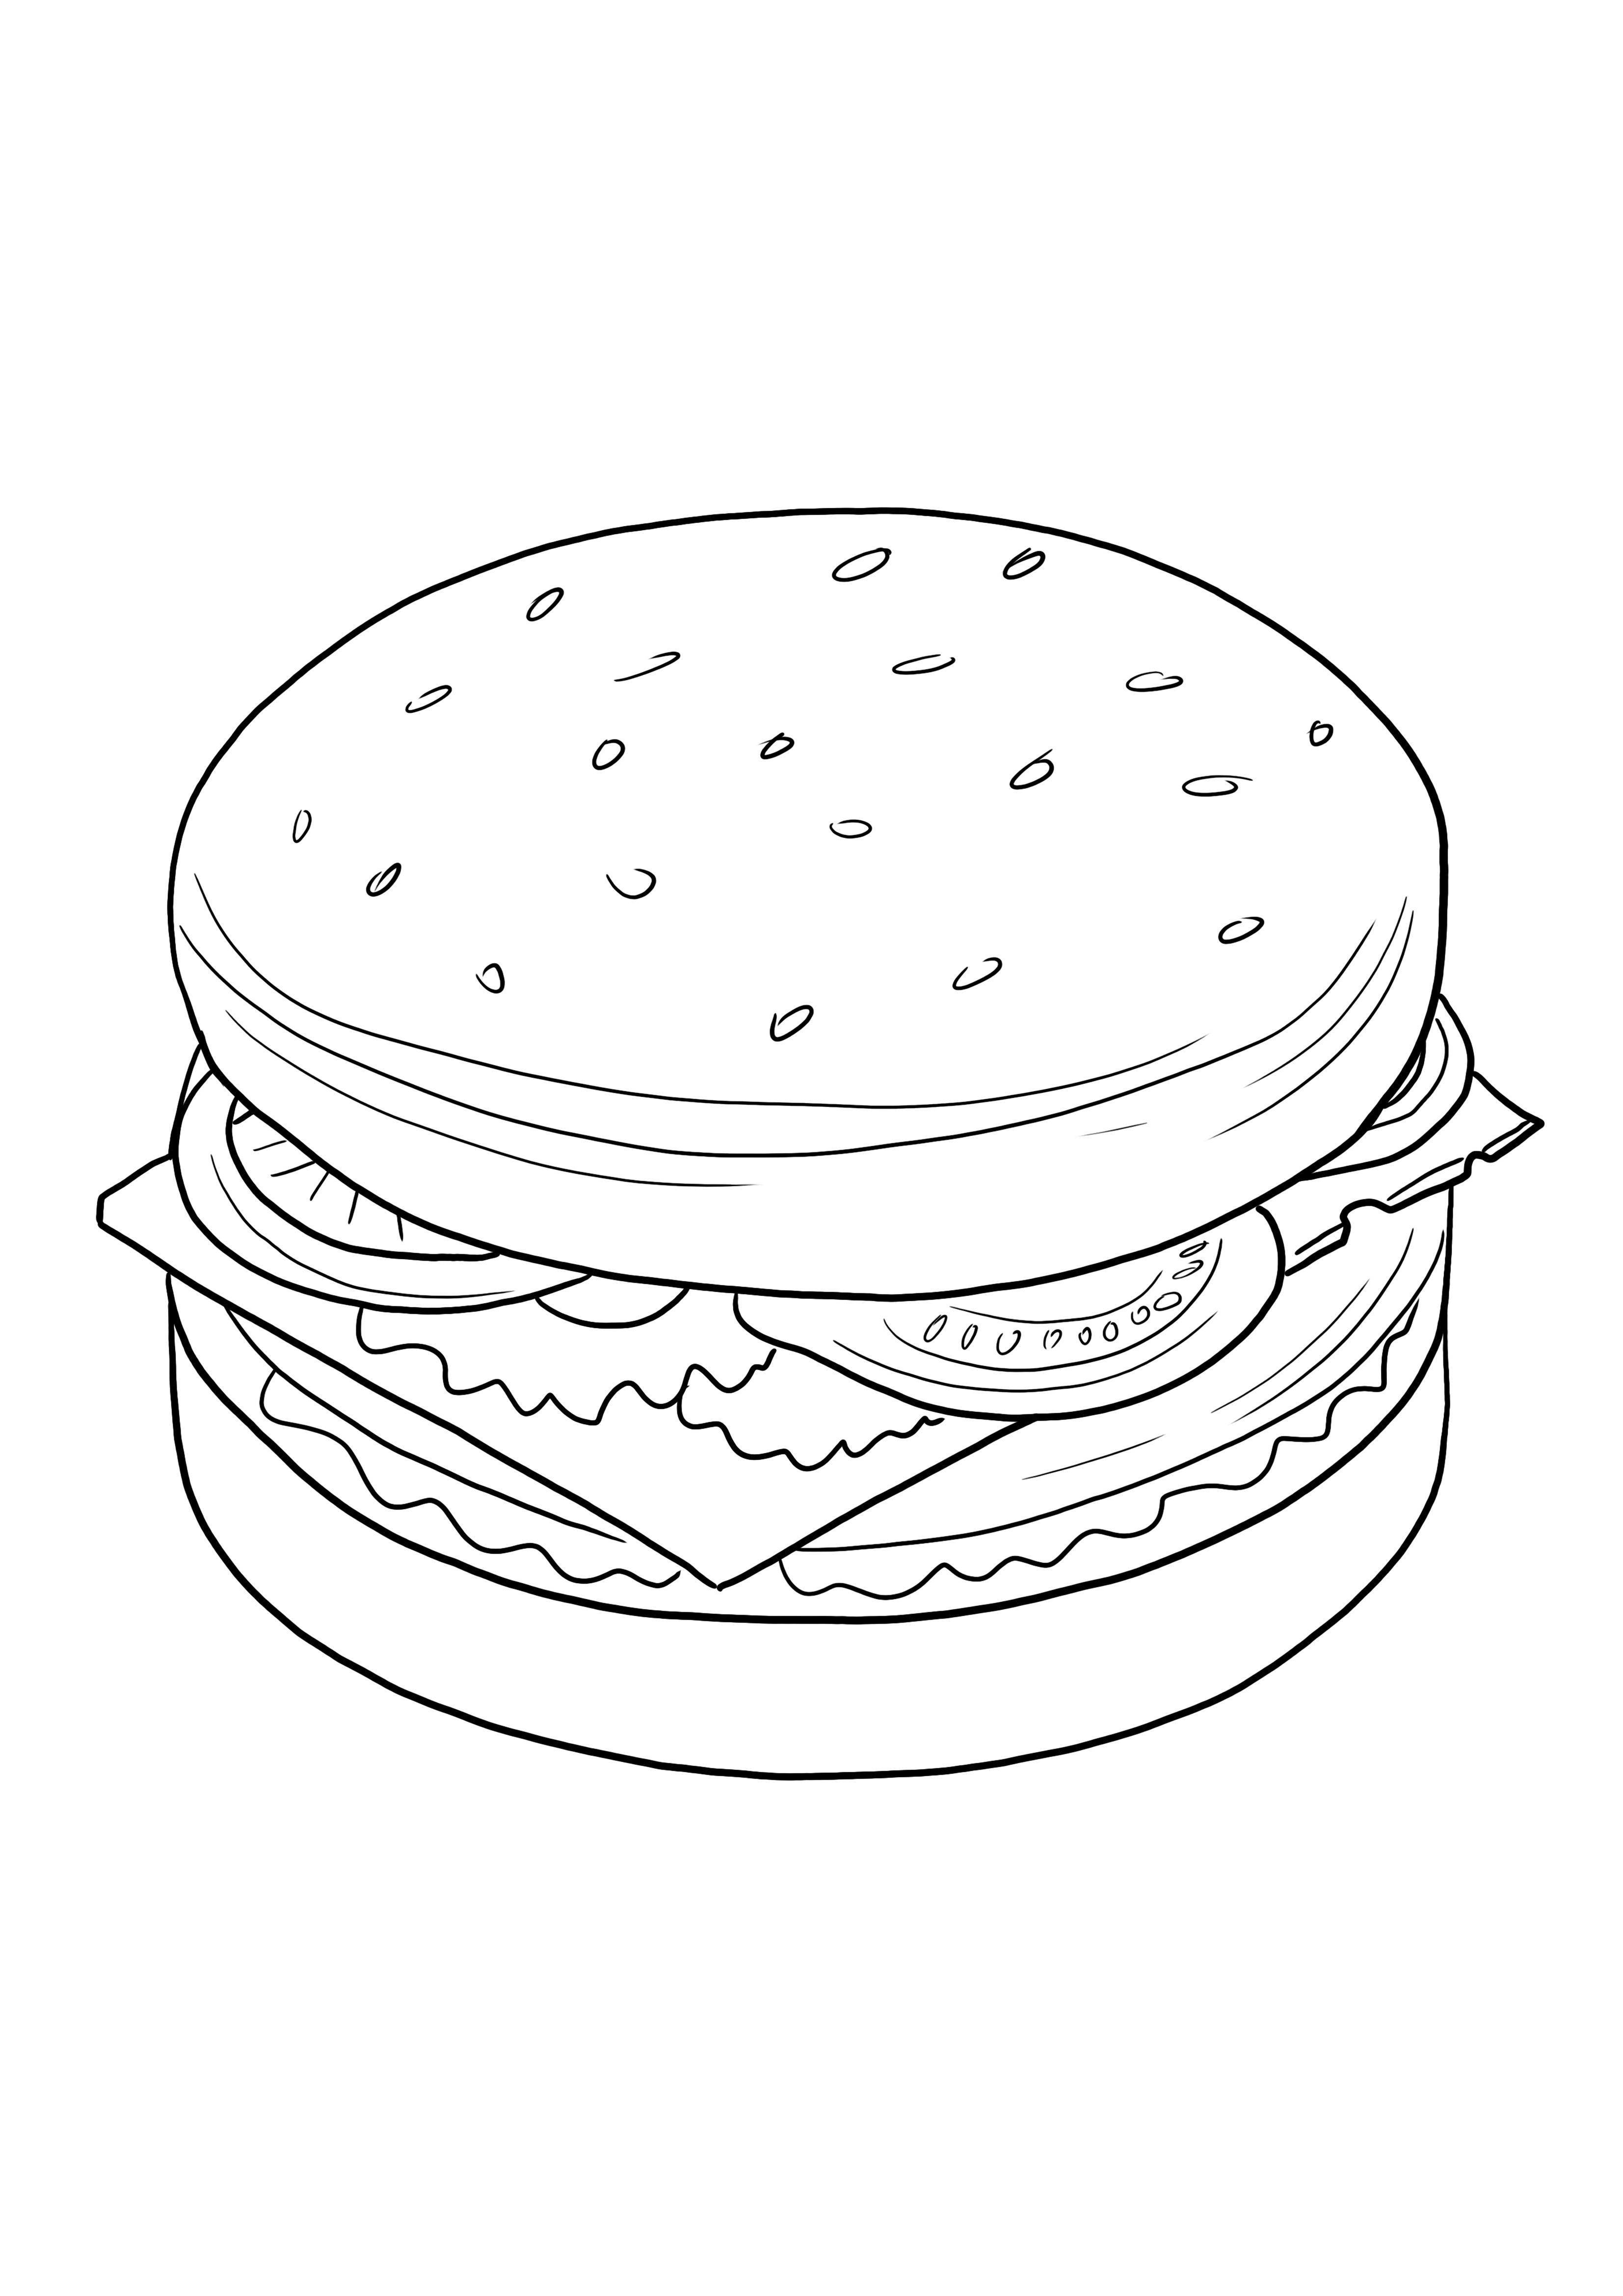 Cheeseburger free to print and color picture for kids of all ages